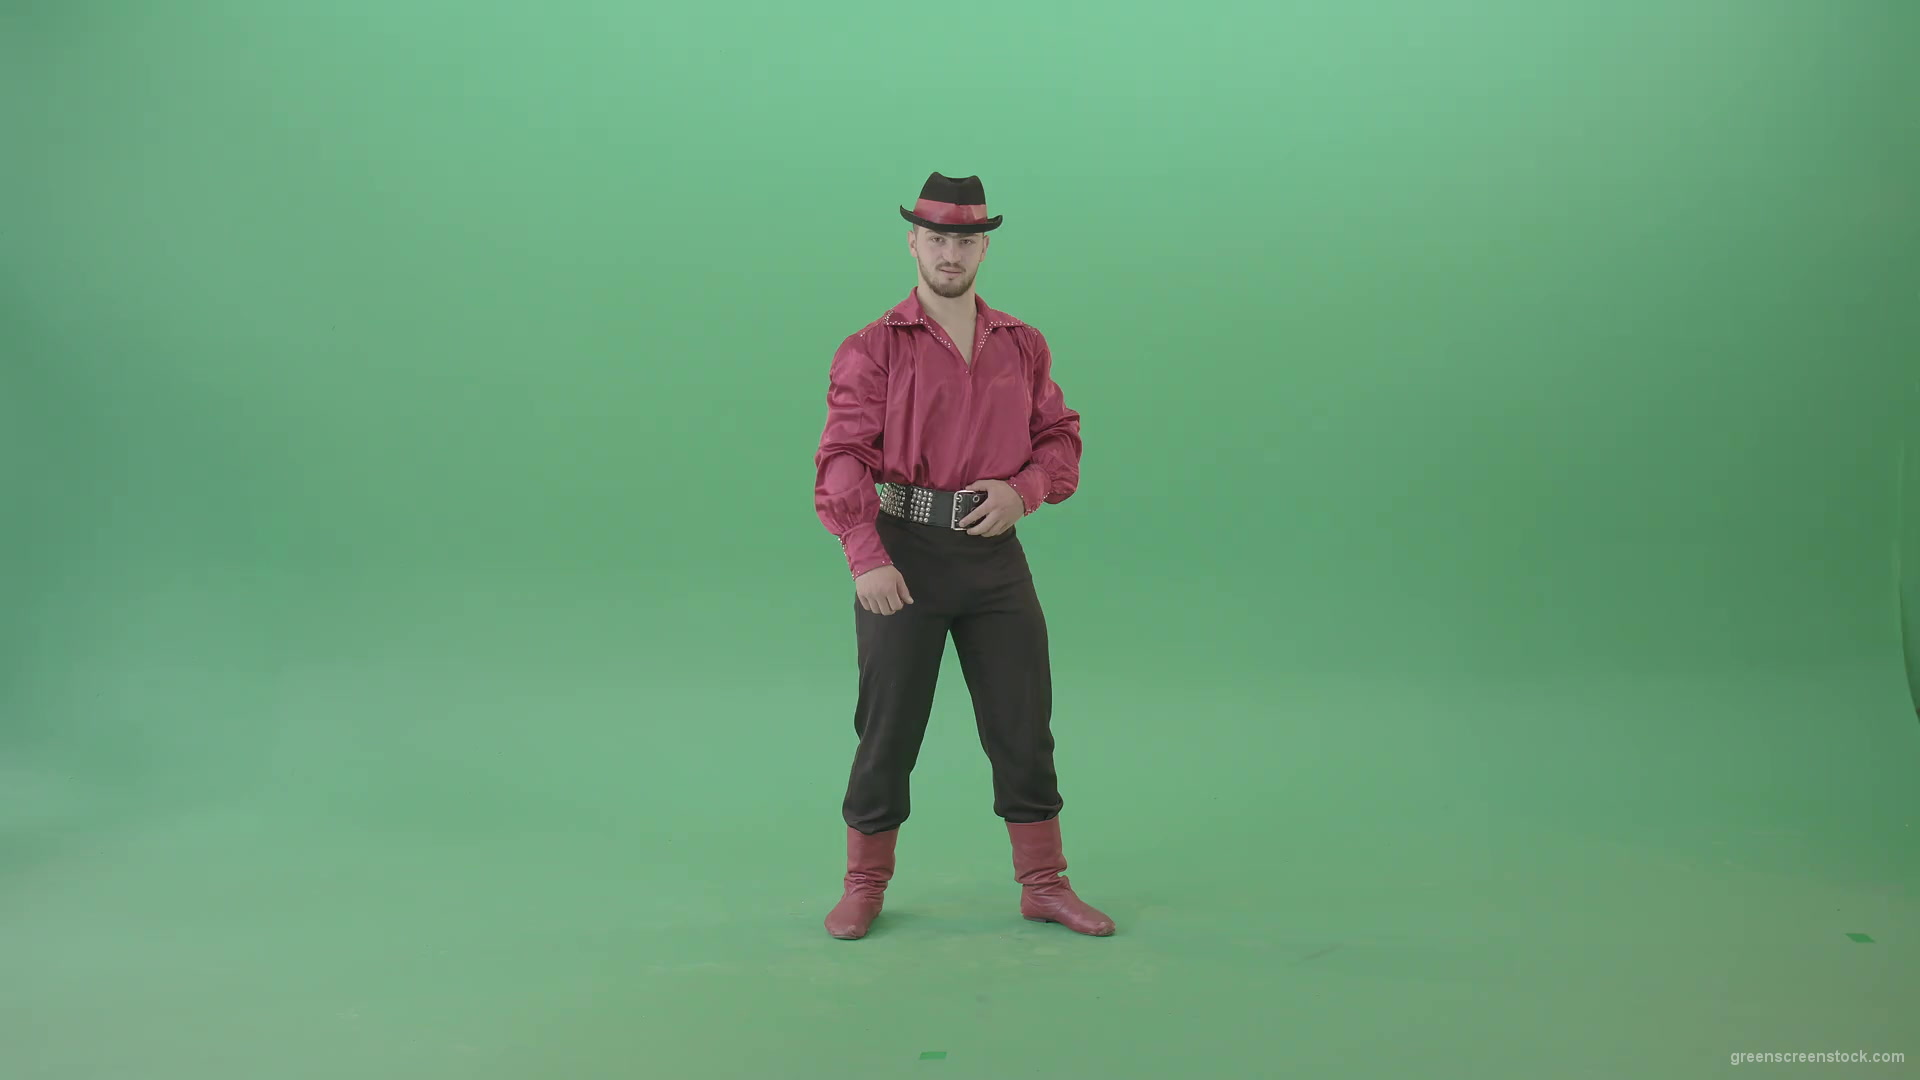 Modovian-Balkan-Gipsy-man-clapping-hands-isolalated-on-green-screen-4K-Video-Footage-1920_001 Green Screen Stock